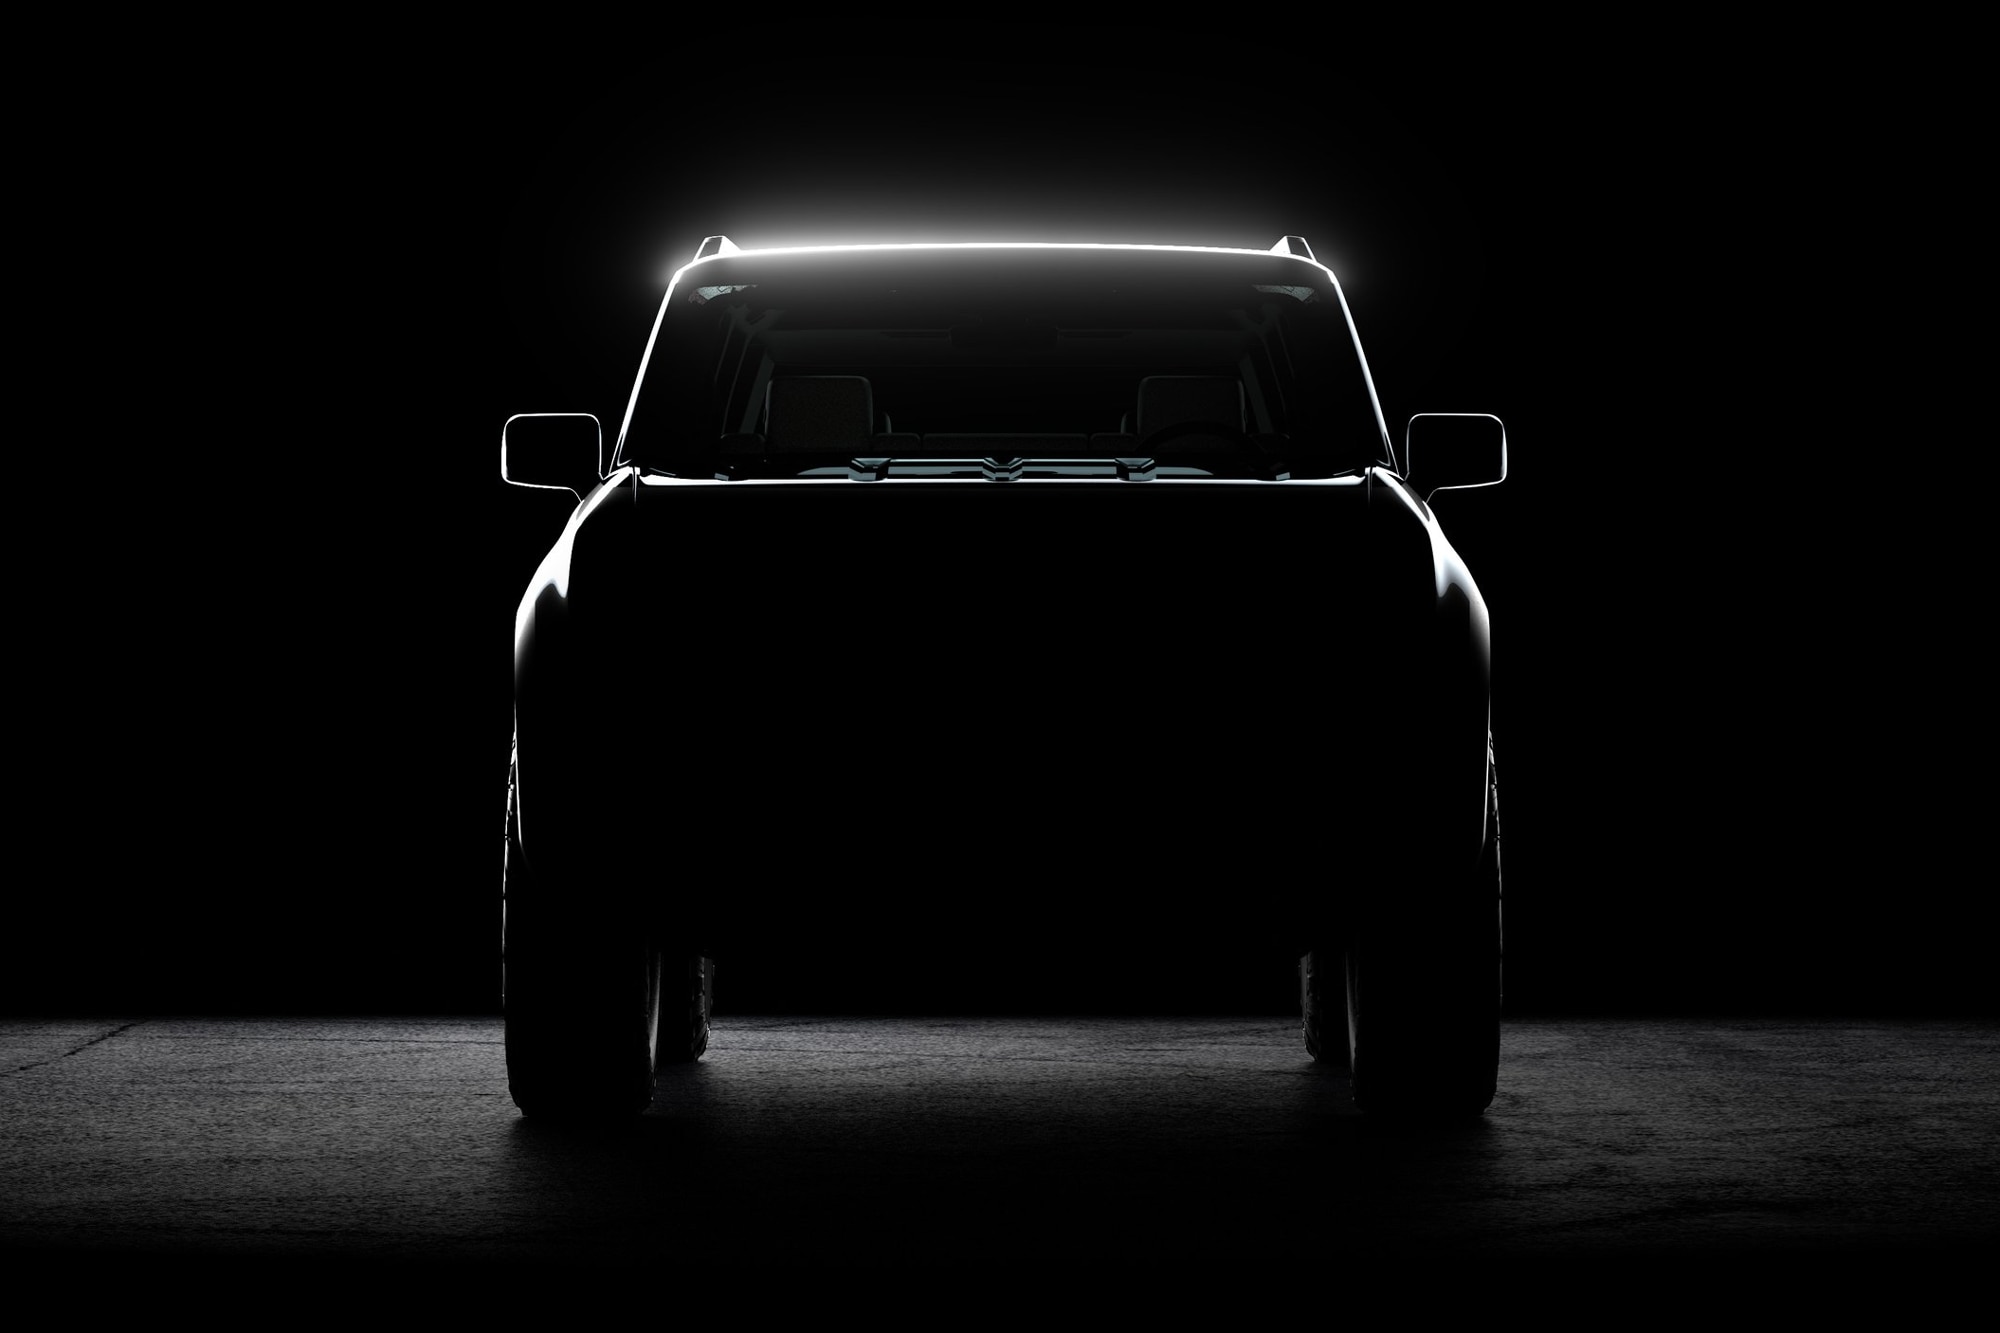 Silhouette of the front end view of a Scout Motors pickup truck.